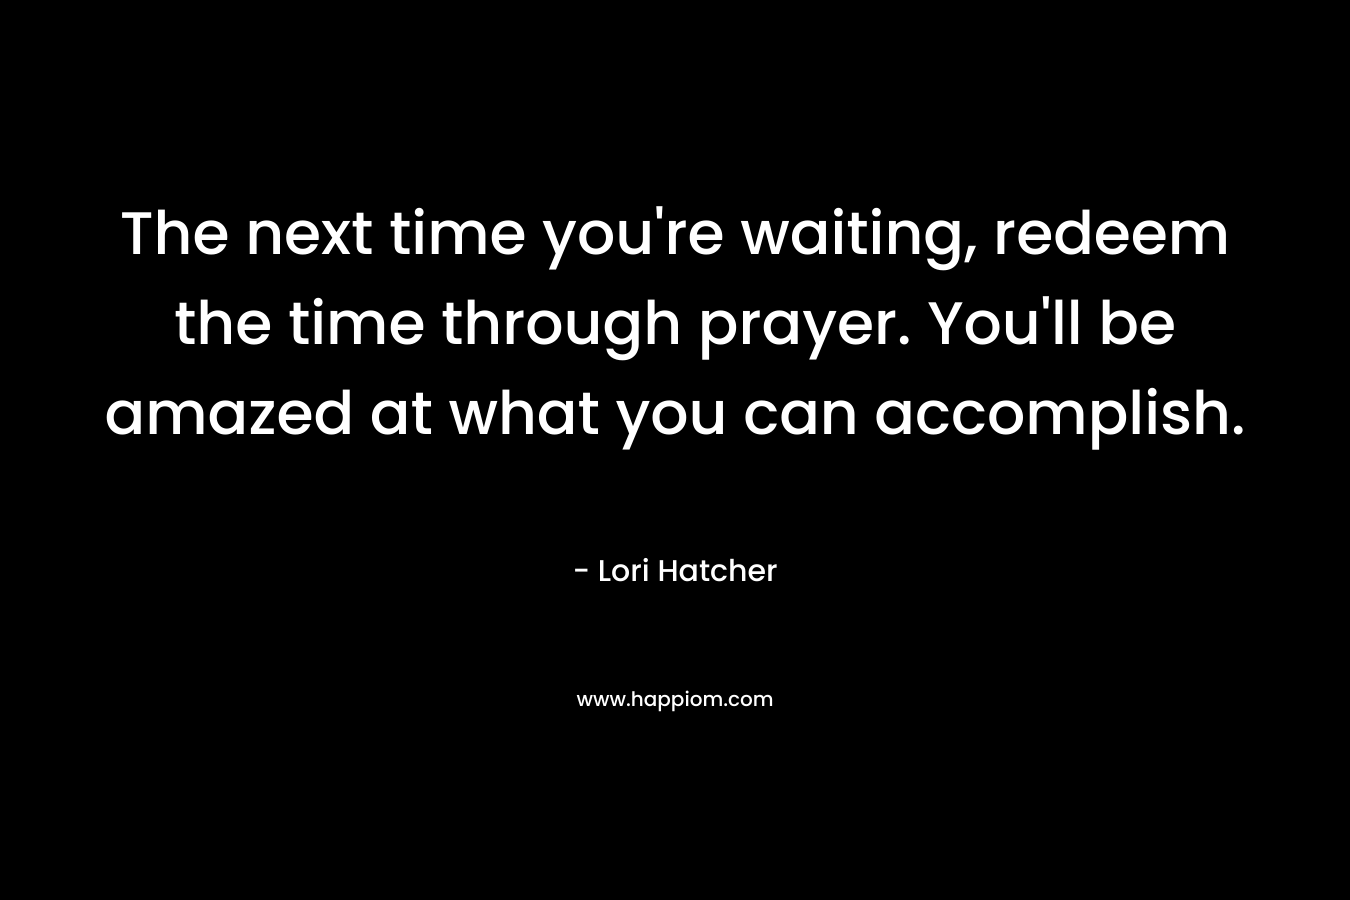 The next time you're waiting, redeem the time through prayer. You'll be amazed at what you can accomplish.